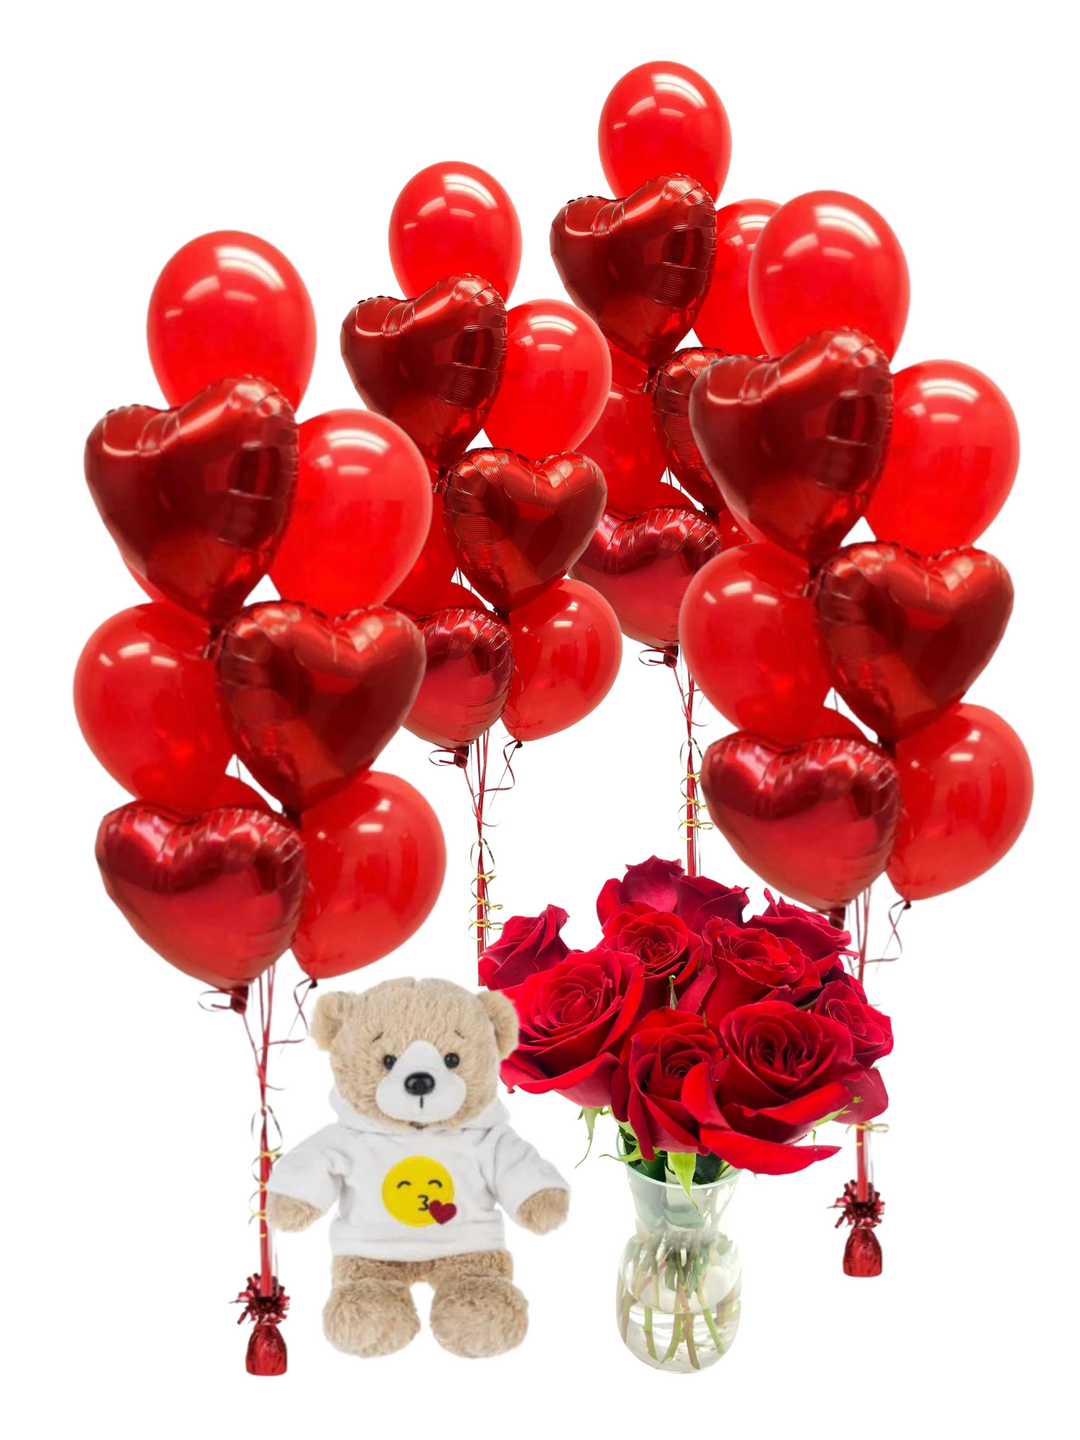 roses, bears and balloons for your valentine's day balloons